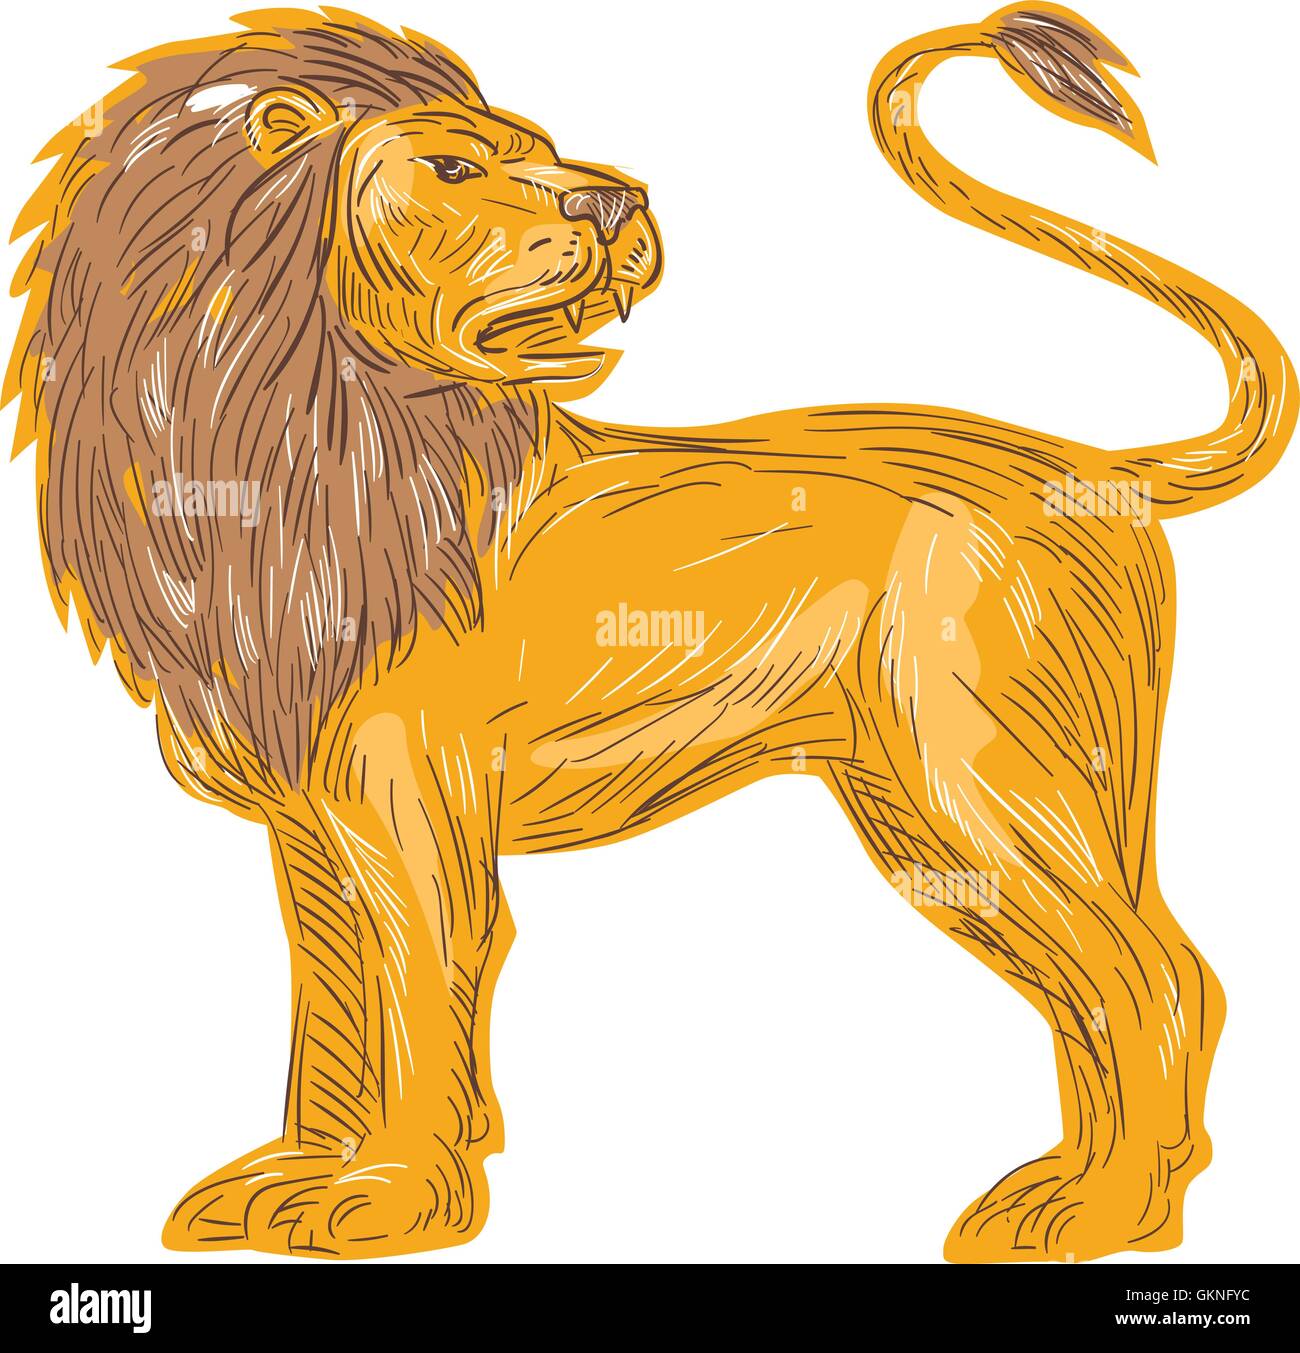 Drawing sketch style illustration of an angry lion big cat roaring showing teeth fangs looking to the back viewed from the side Stock Vector